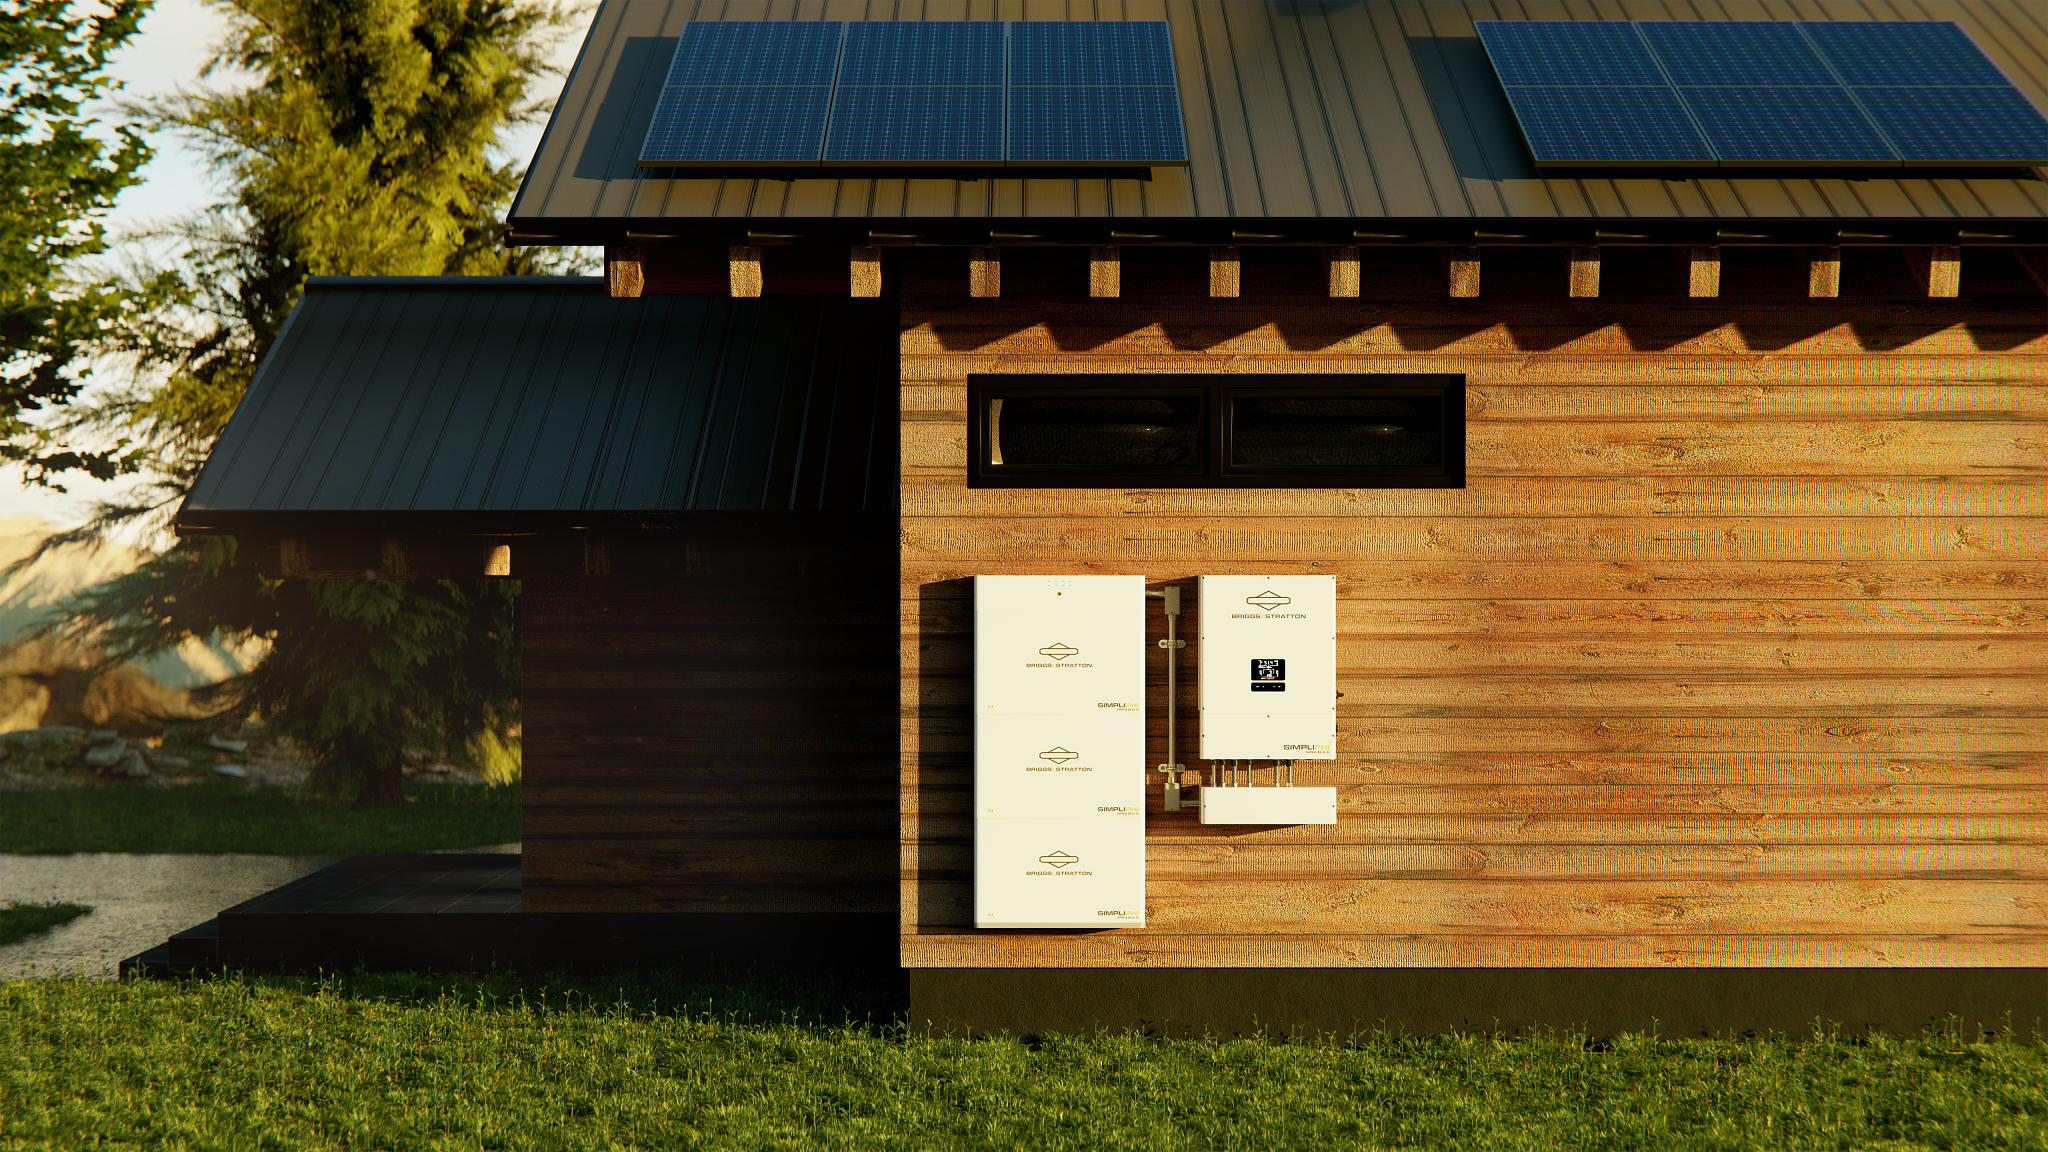 6.6 SimpliPHI Battery Energy Storage System can be mounted indoors or out.